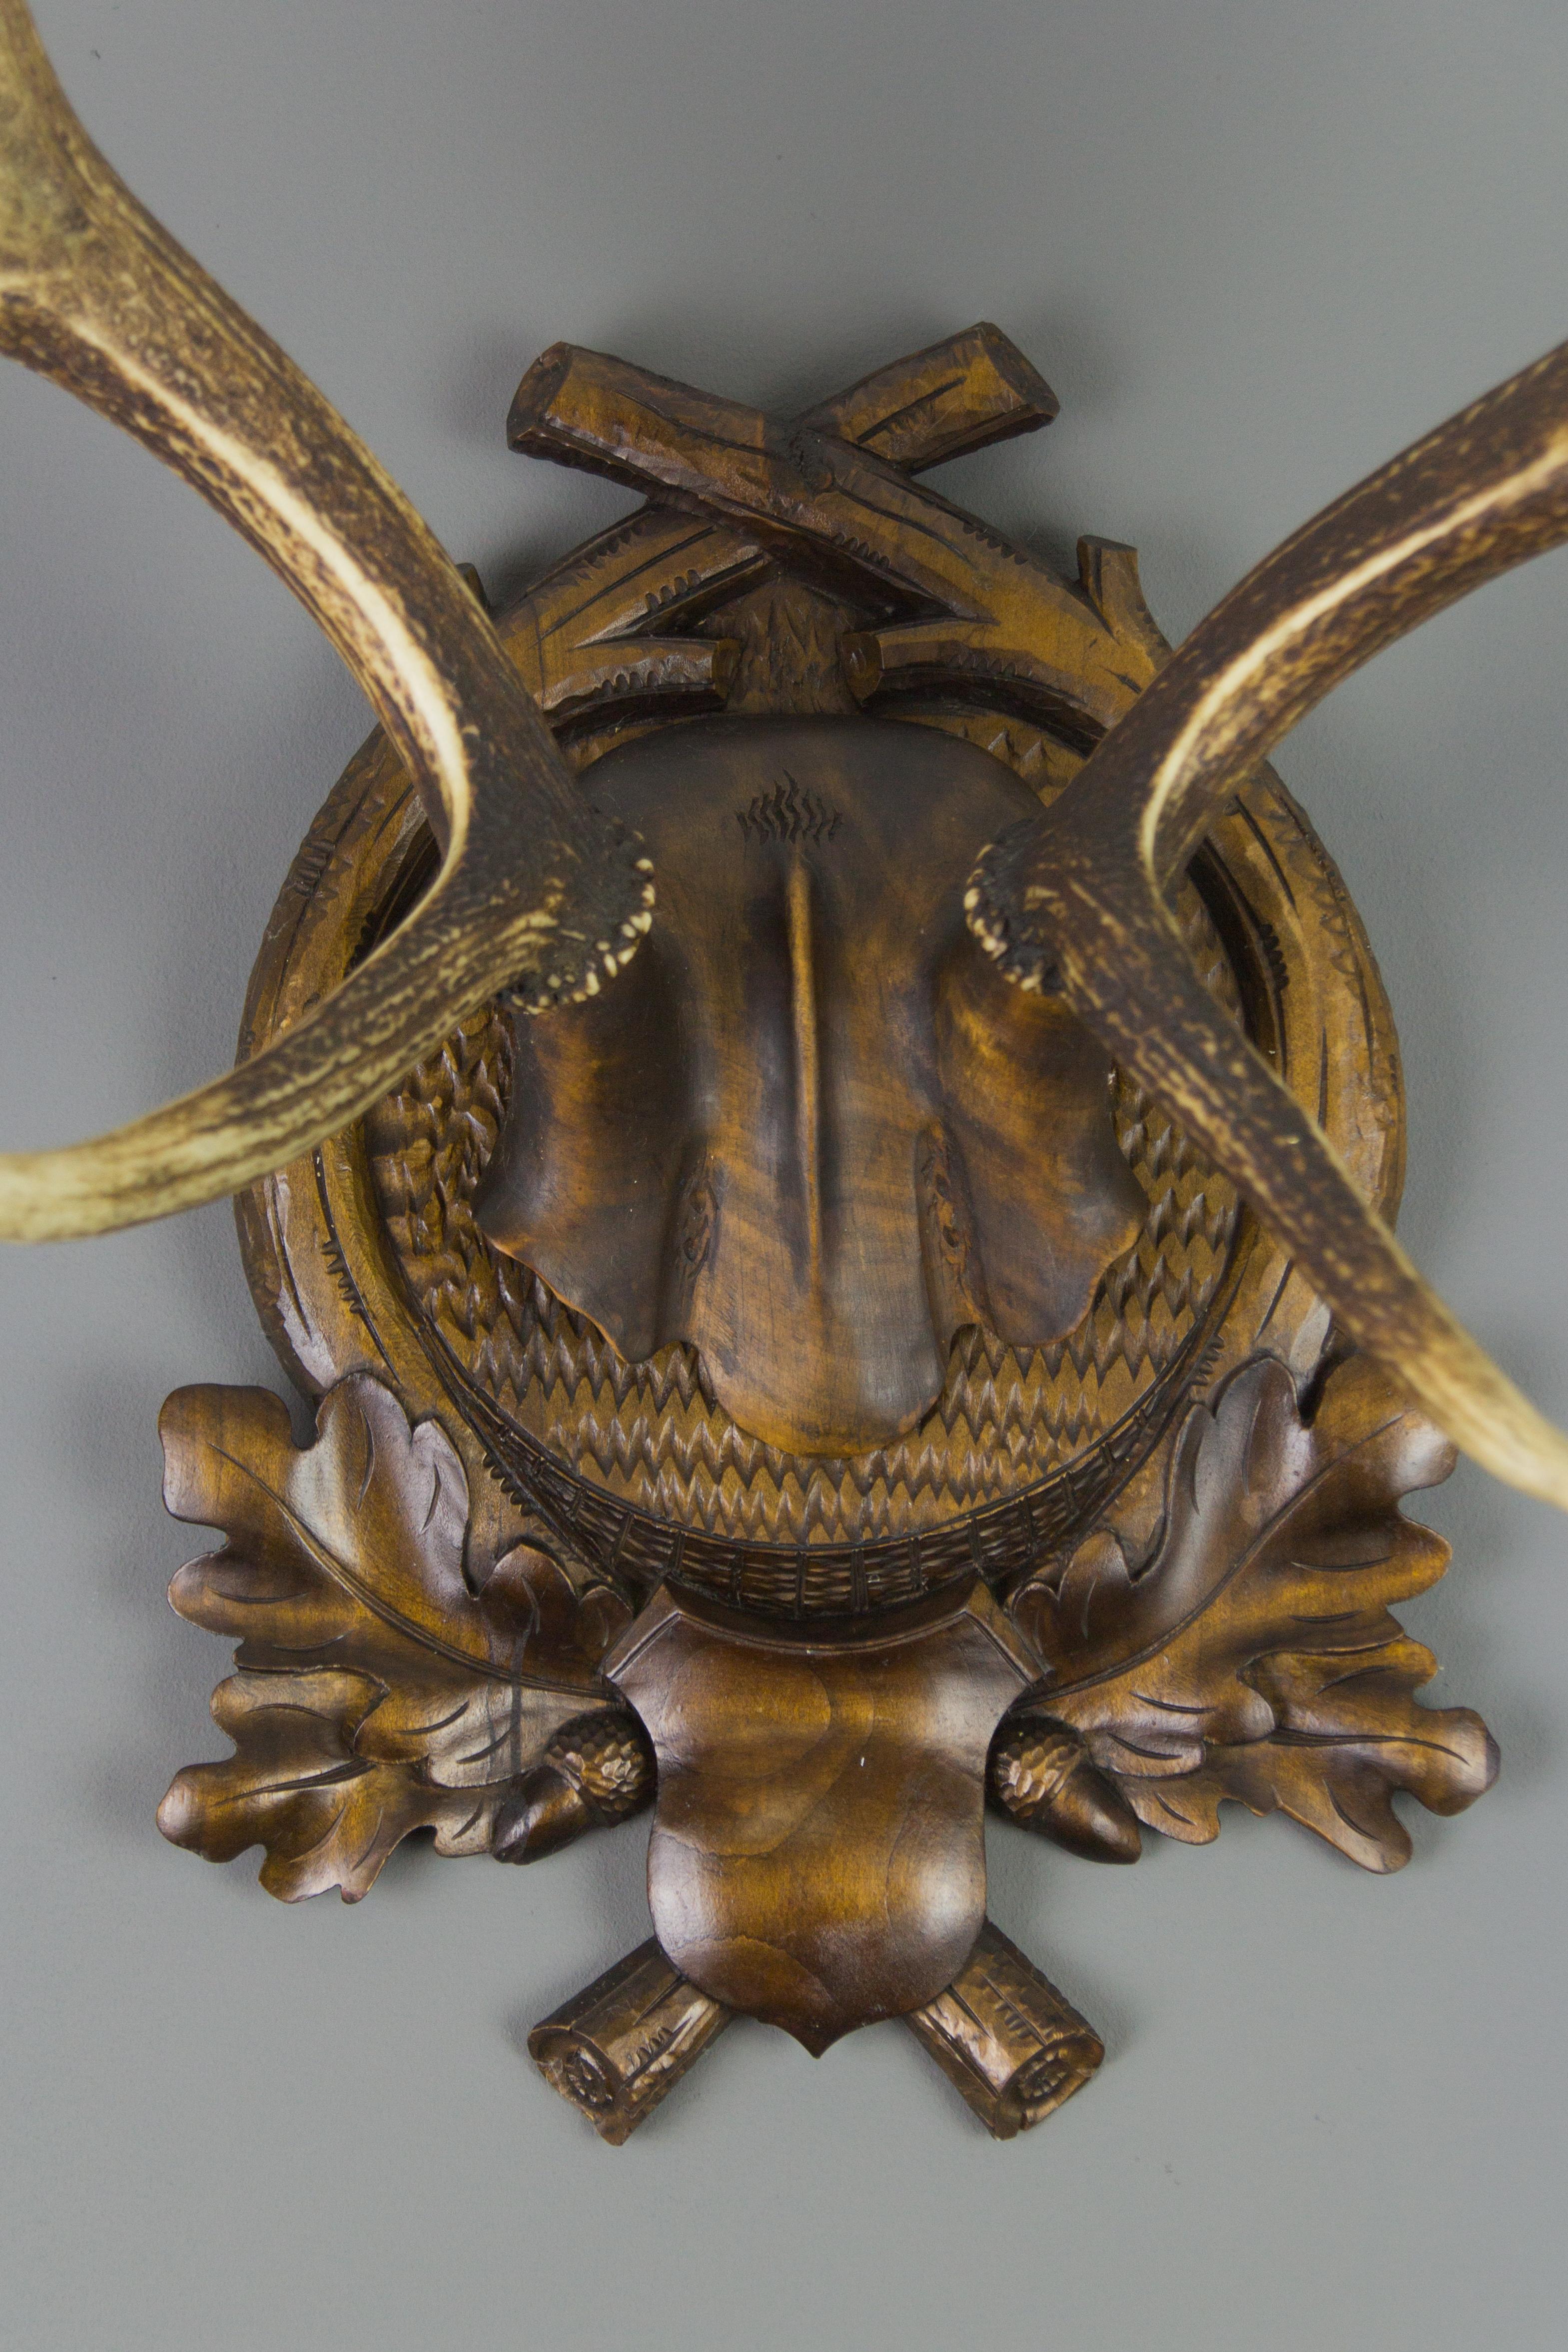 Black Forest Carved Trophy Board with Eight Point Antlers, Germany, Late 19th Century